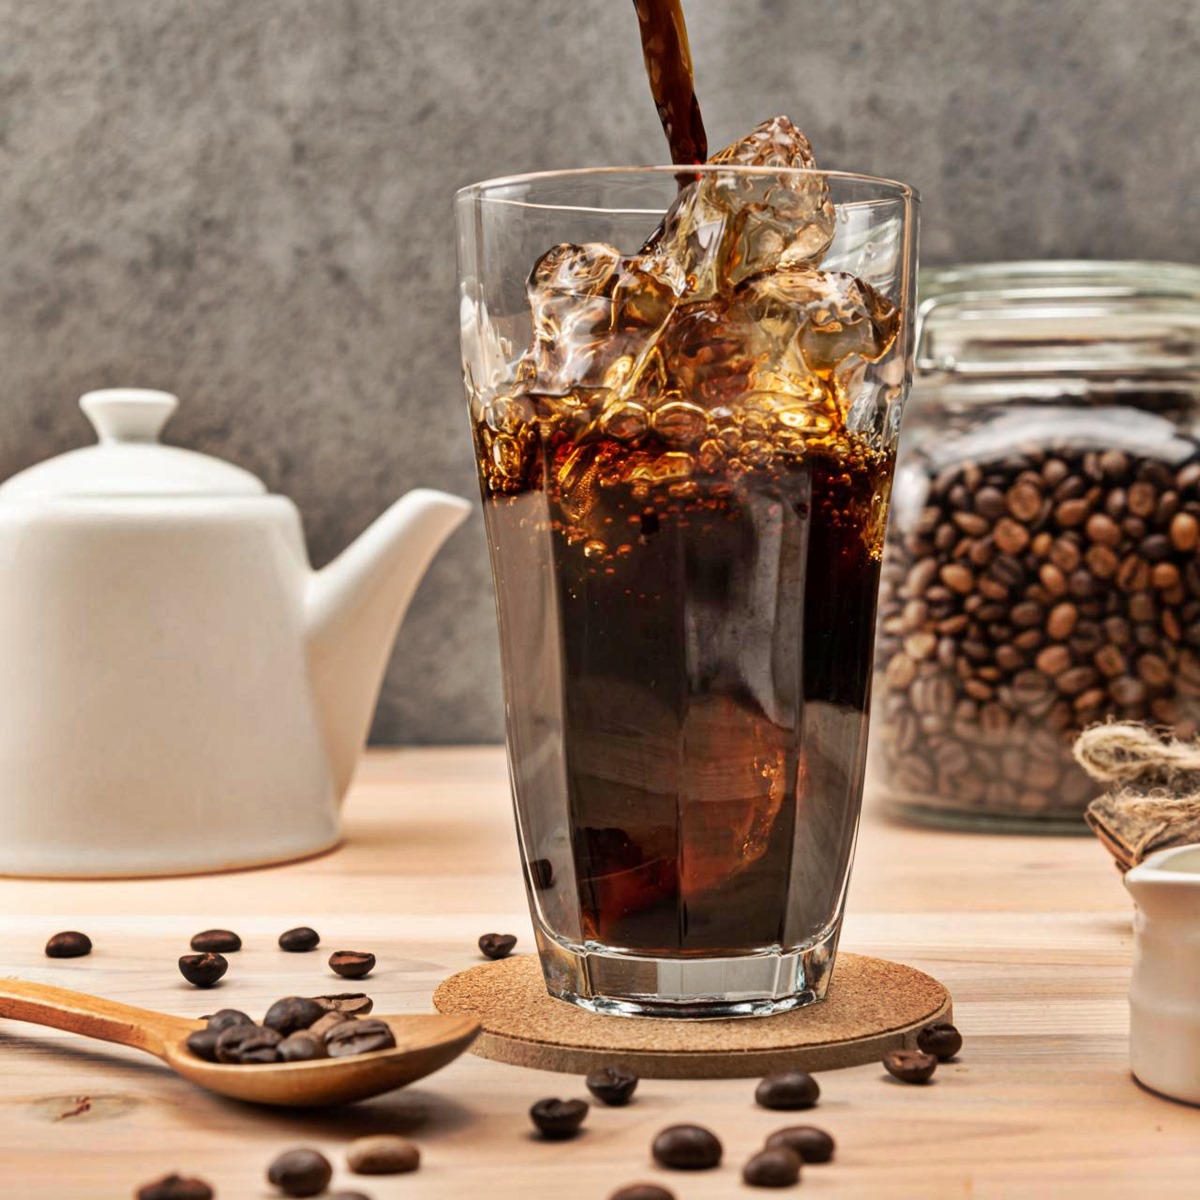 https://recipes.net/wp-content/uploads/2023/09/whats-your-iced-coffee-method-1694965651.jpg